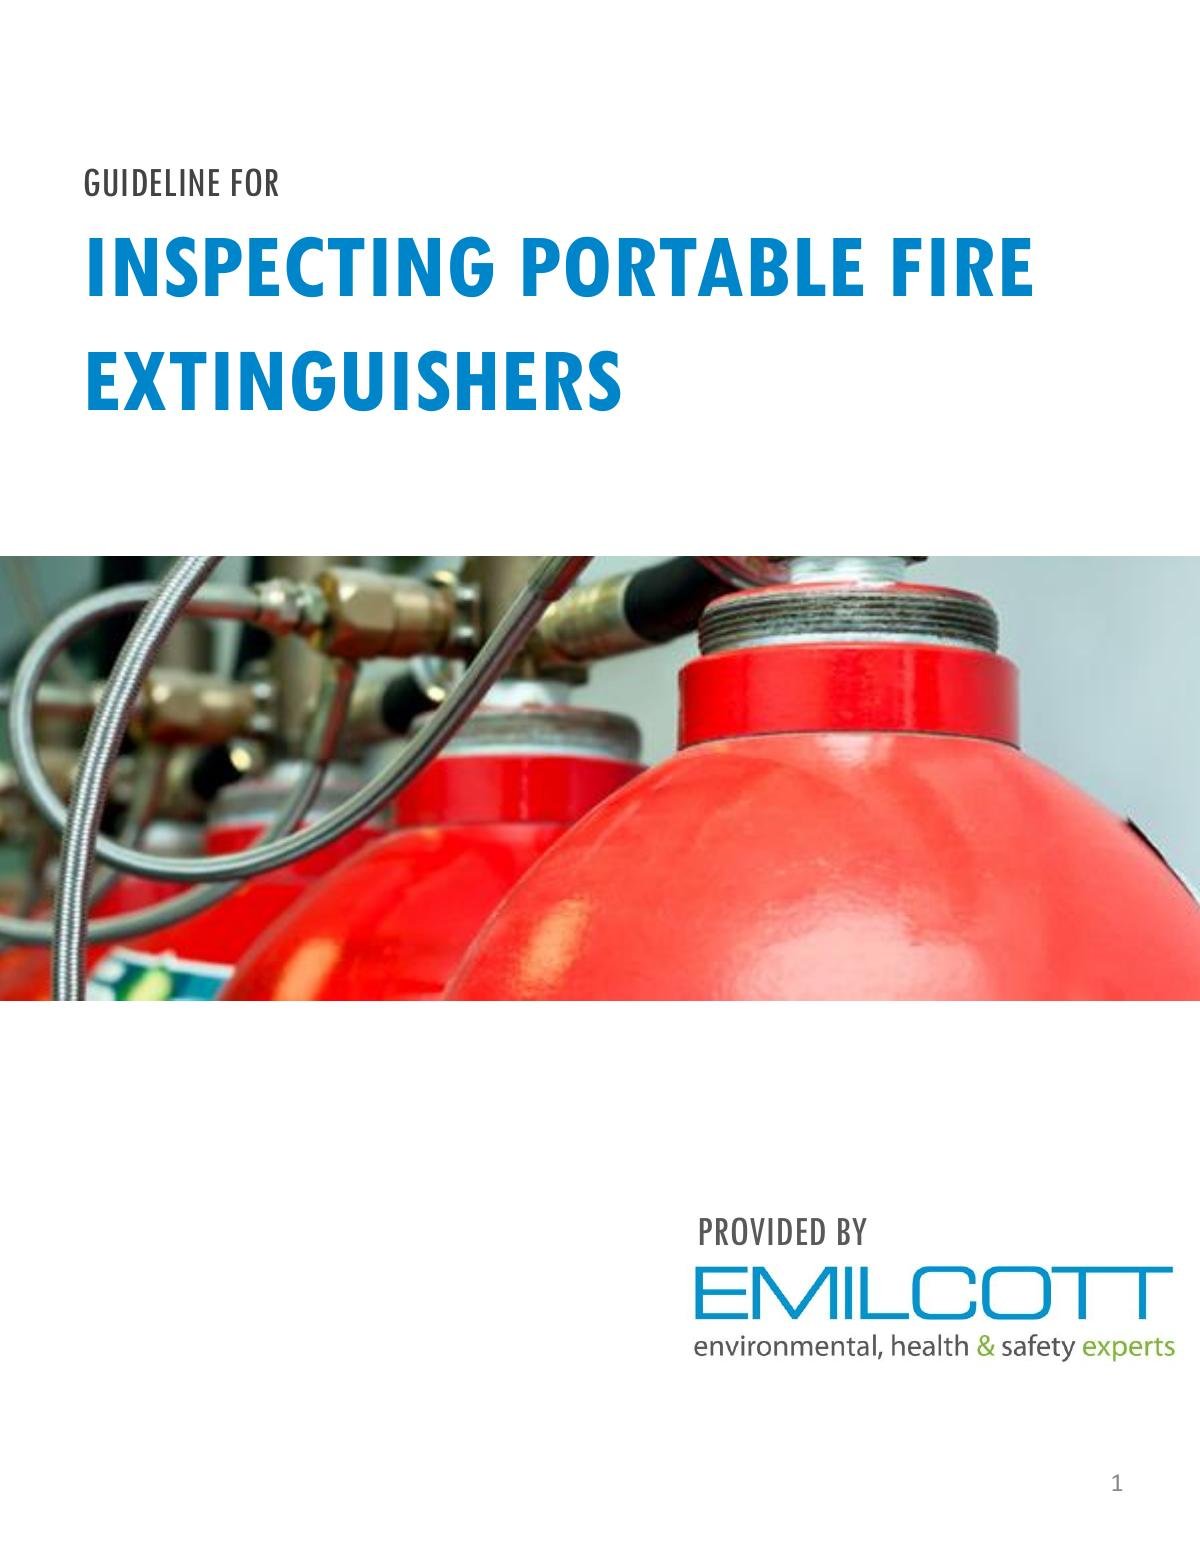 Guideline for Inspecting Portable Fire Extinguishers for OSHA Requirements